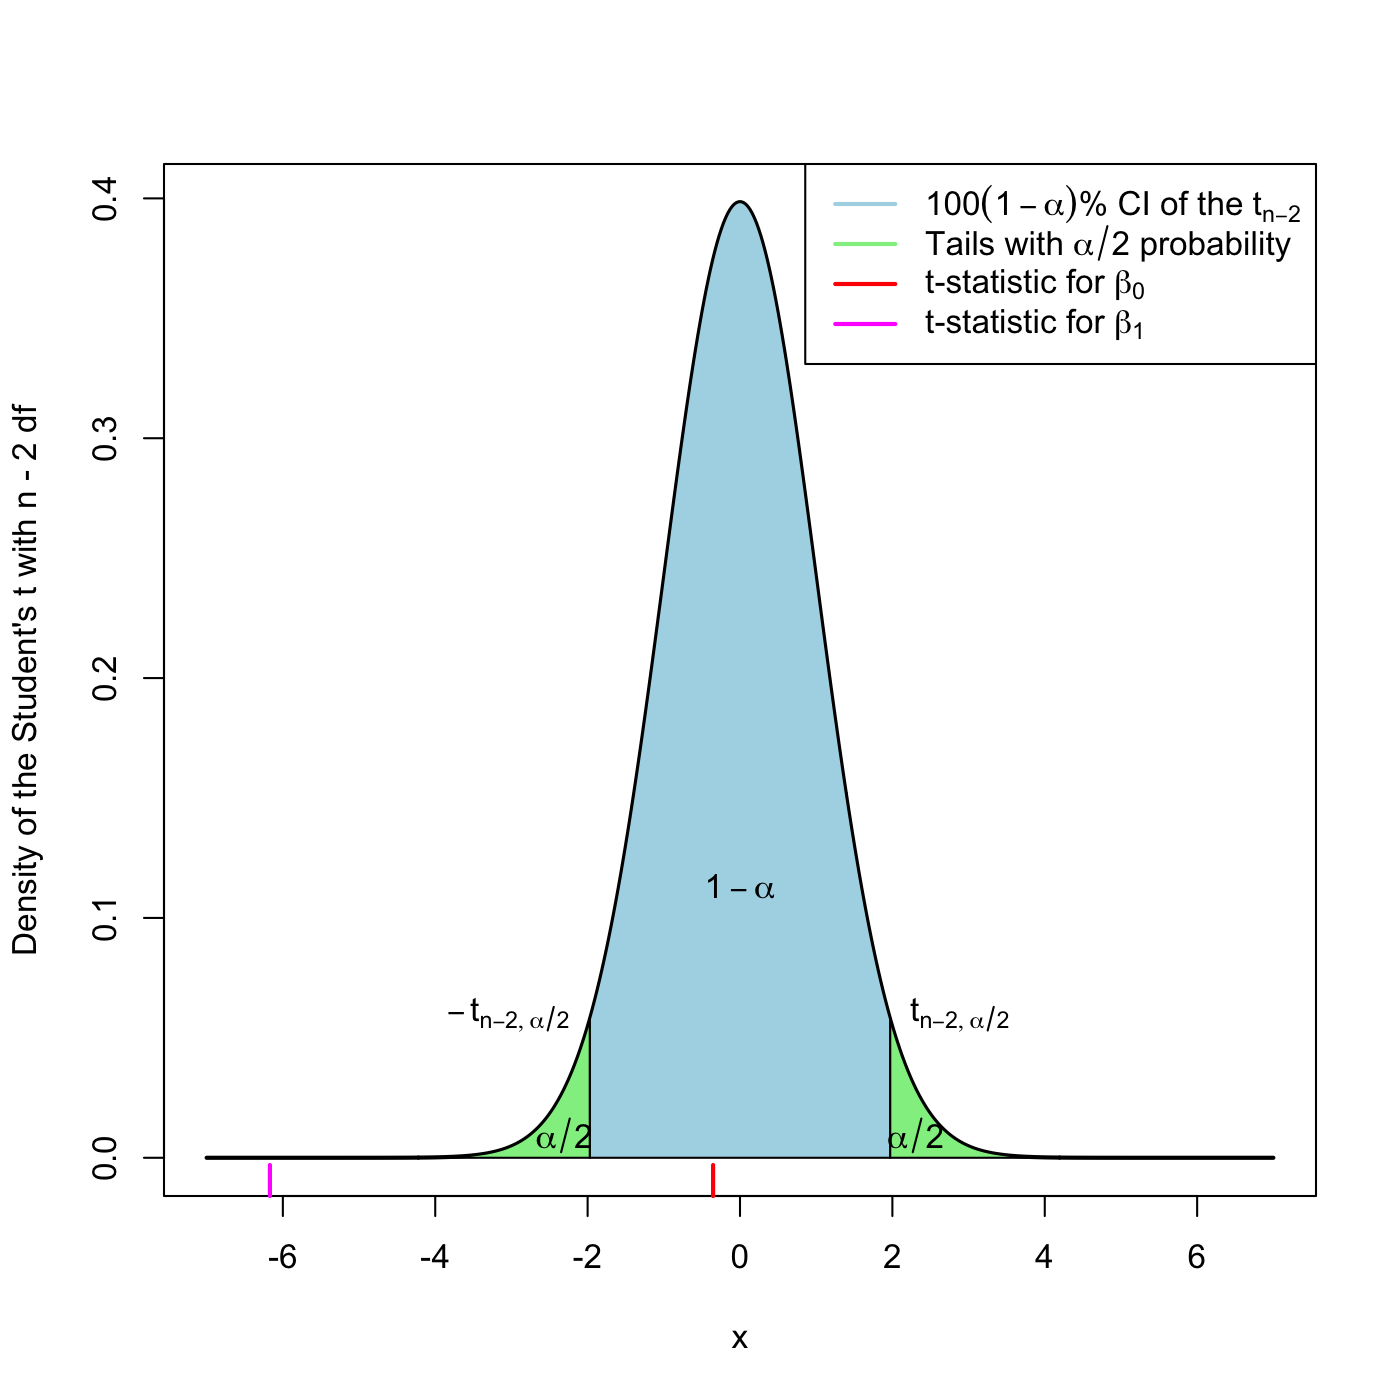 The Student’s \(t\) distribution for the \(t\)-statistics associated to null intercept and slope, for the y1 ~ x1 regression of the assumptions dataset.